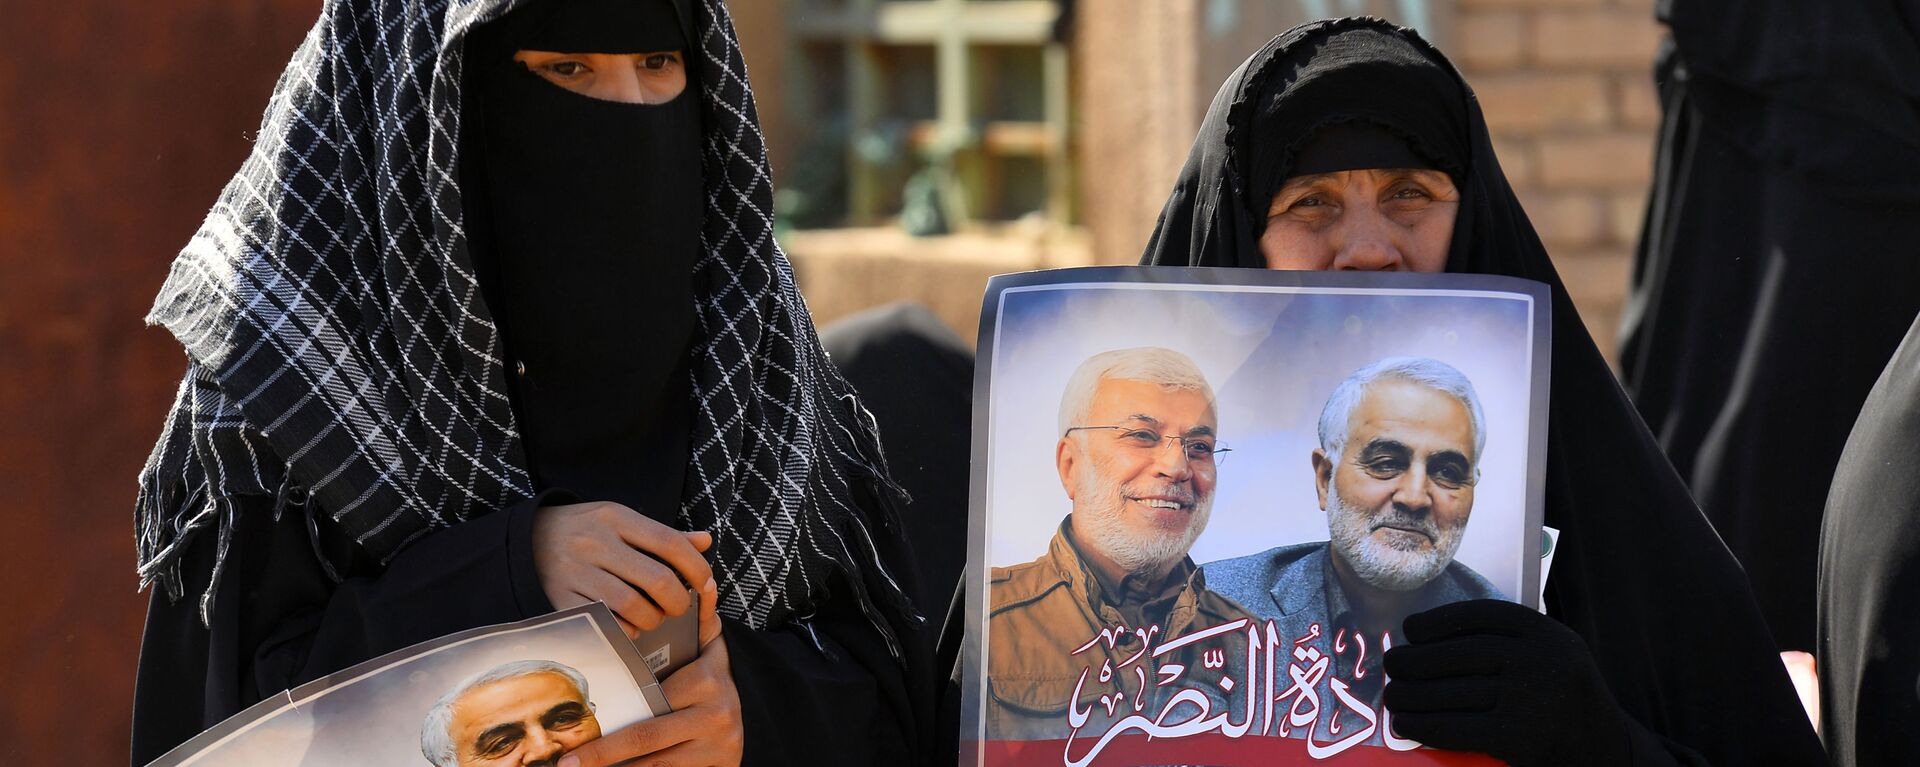 Iraqi women hold portraits of Iran's late top general Qasem Soleimani (R) and Iraqi paramilitary commander Abu Mahdi al-Muhandis, killed in a US drone strike near Baghdad airport last month, during a rally called by controversial cleric Moqtada Sadr against the US' presence in Iraq and calling to separate the genders in rallies, on February 14, 2020 in the central city of Kufa - Sputnik International, 1920, 21.02.2020